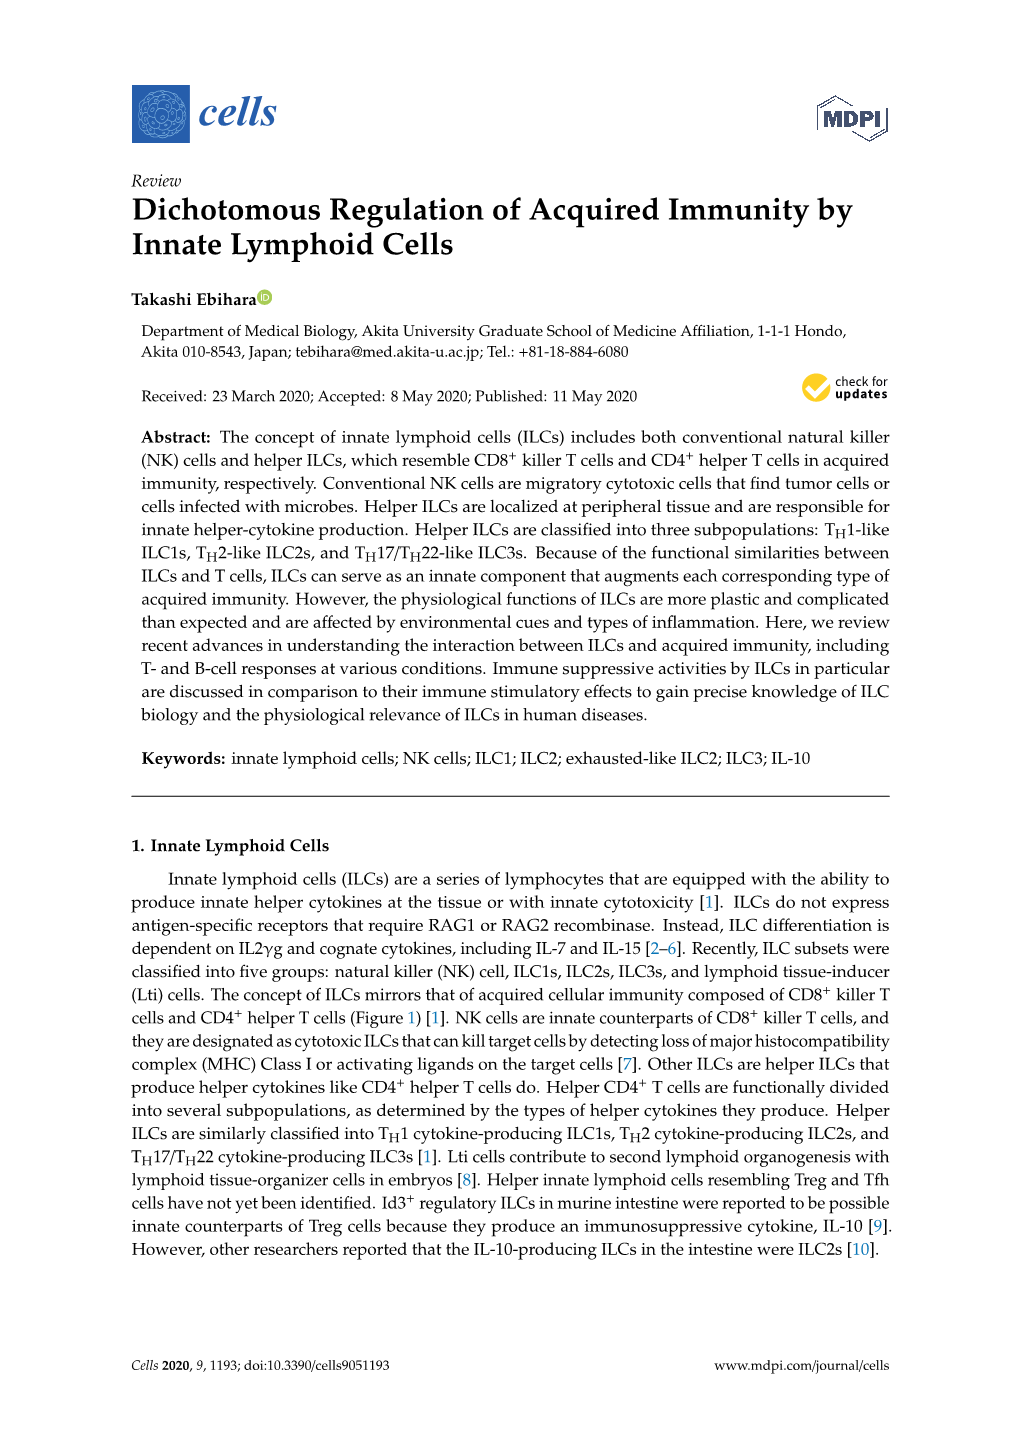 Dichotomous Regulation of Acquired Immunity by Innate Lymphoid Cells